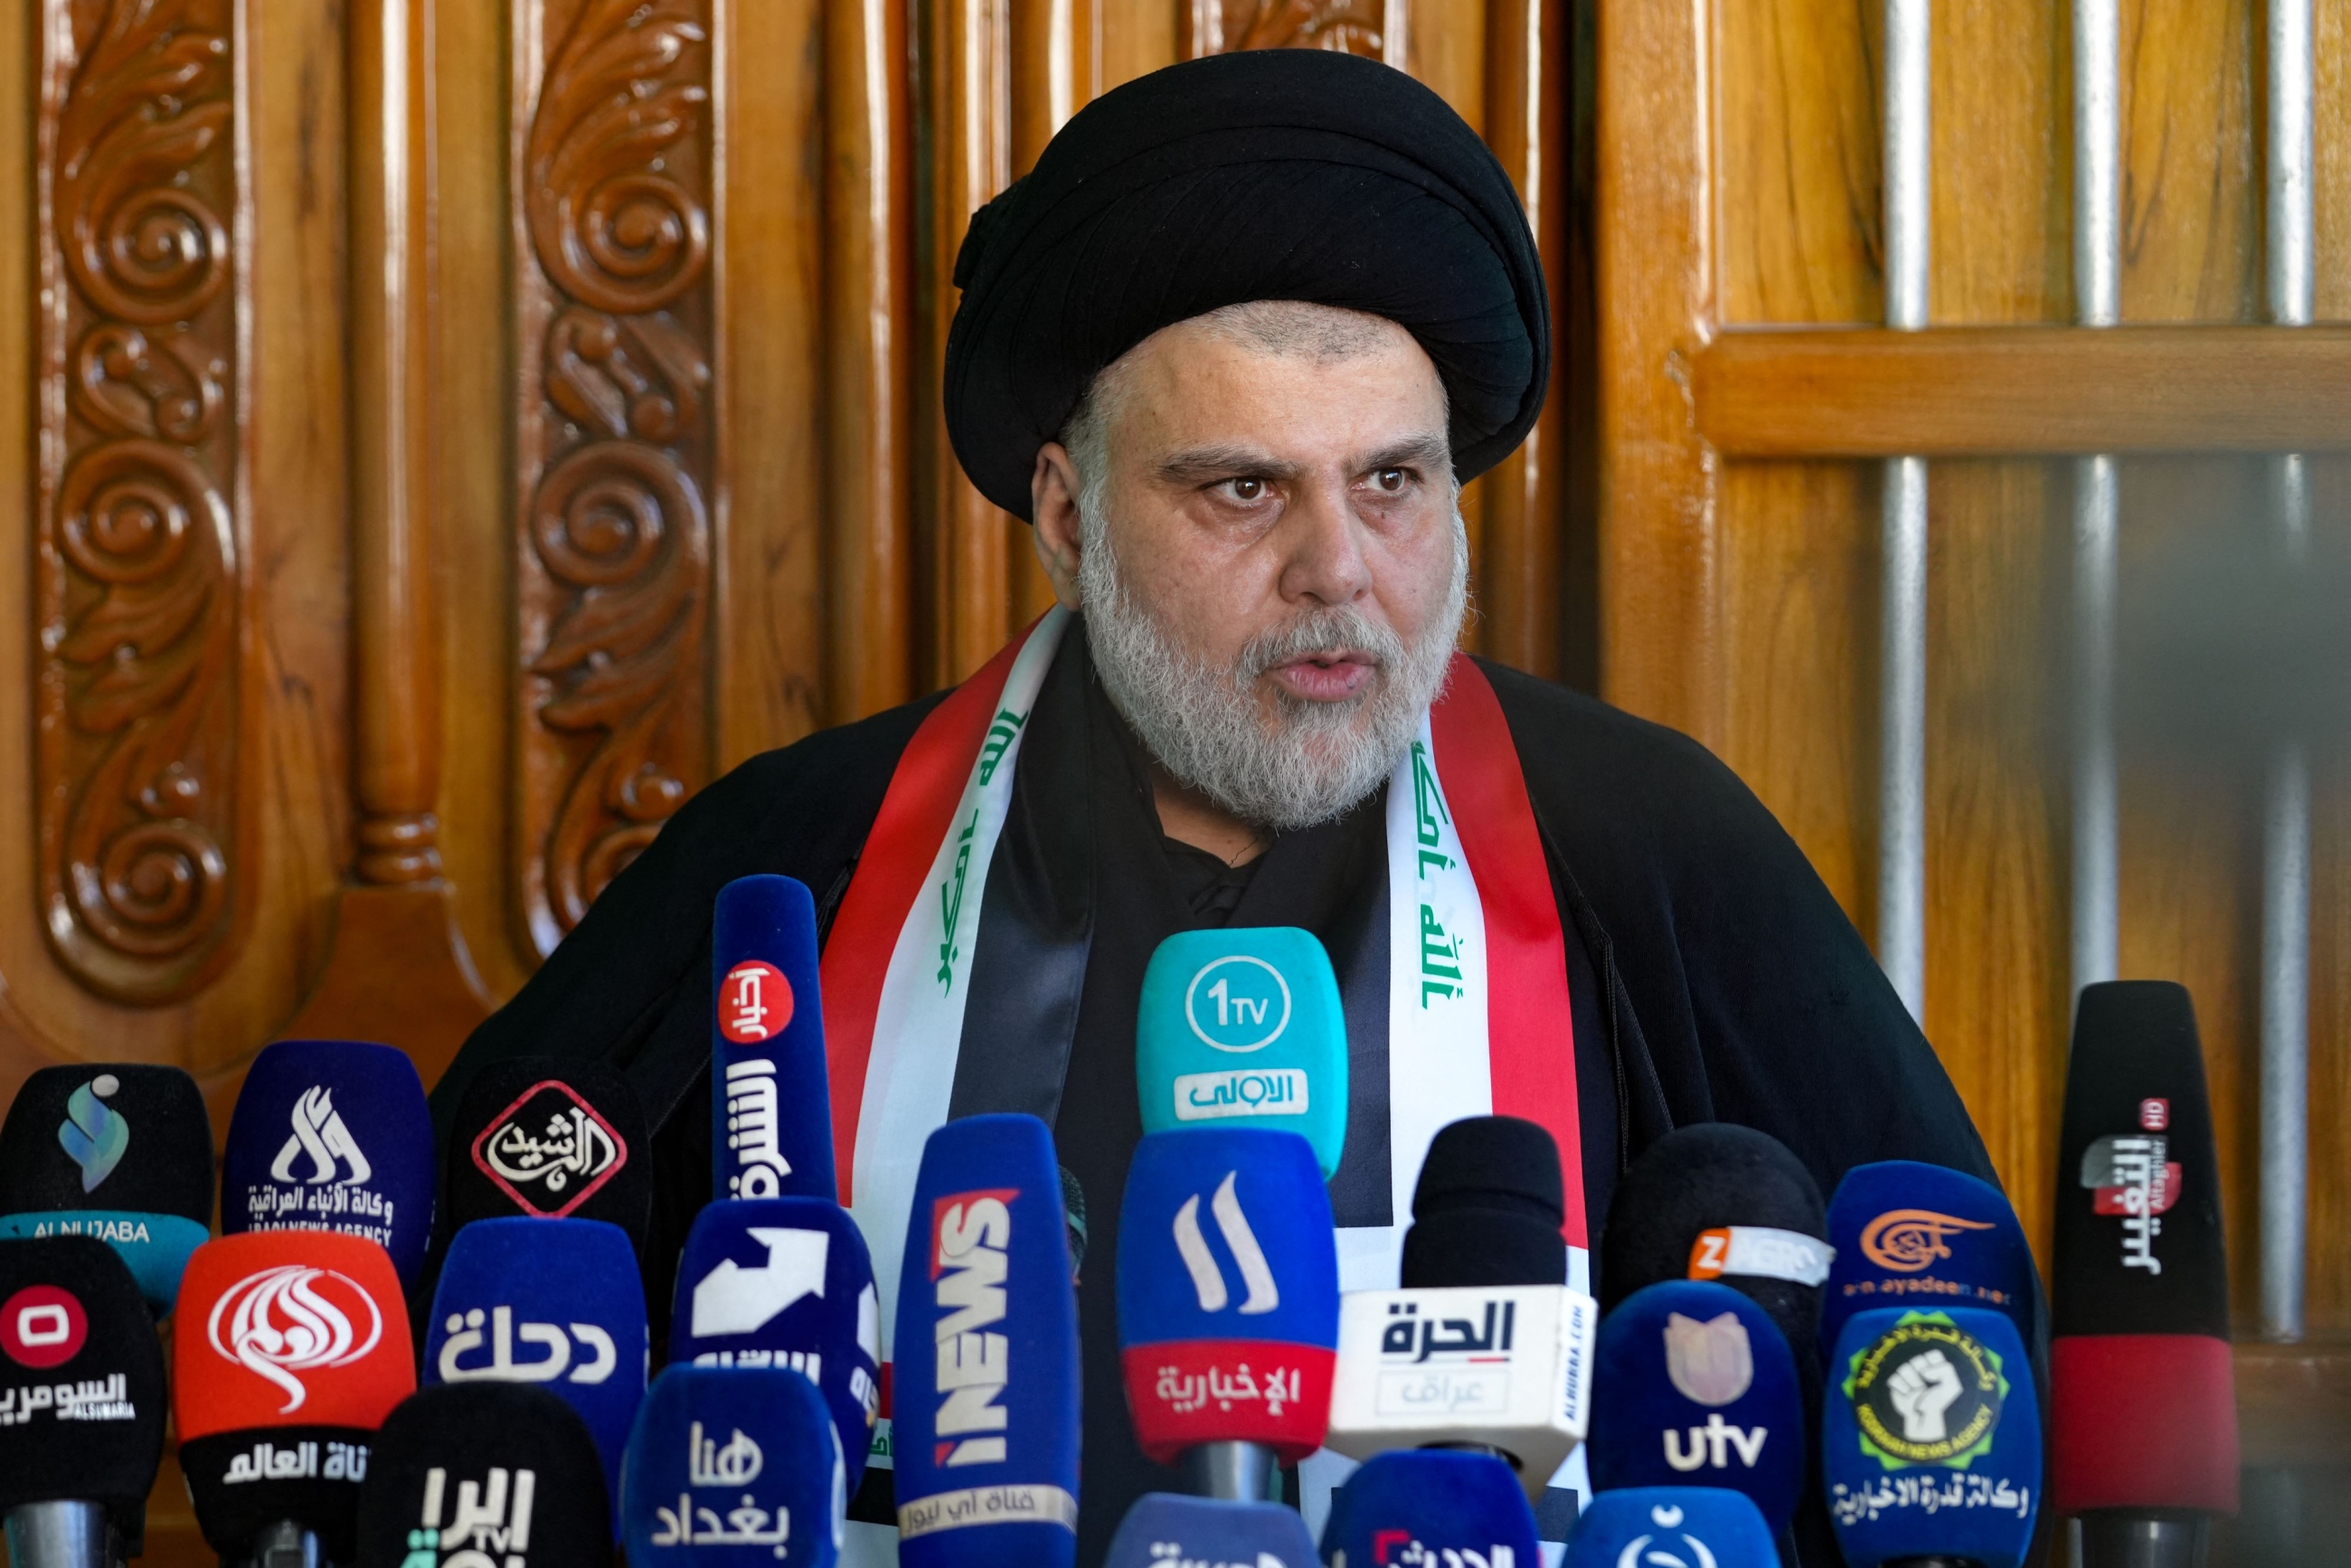 Iraqi cleric Moqtada Sadr gives a press conference at his home in the holy city of Najaf on July 20, 2023 (AFP)